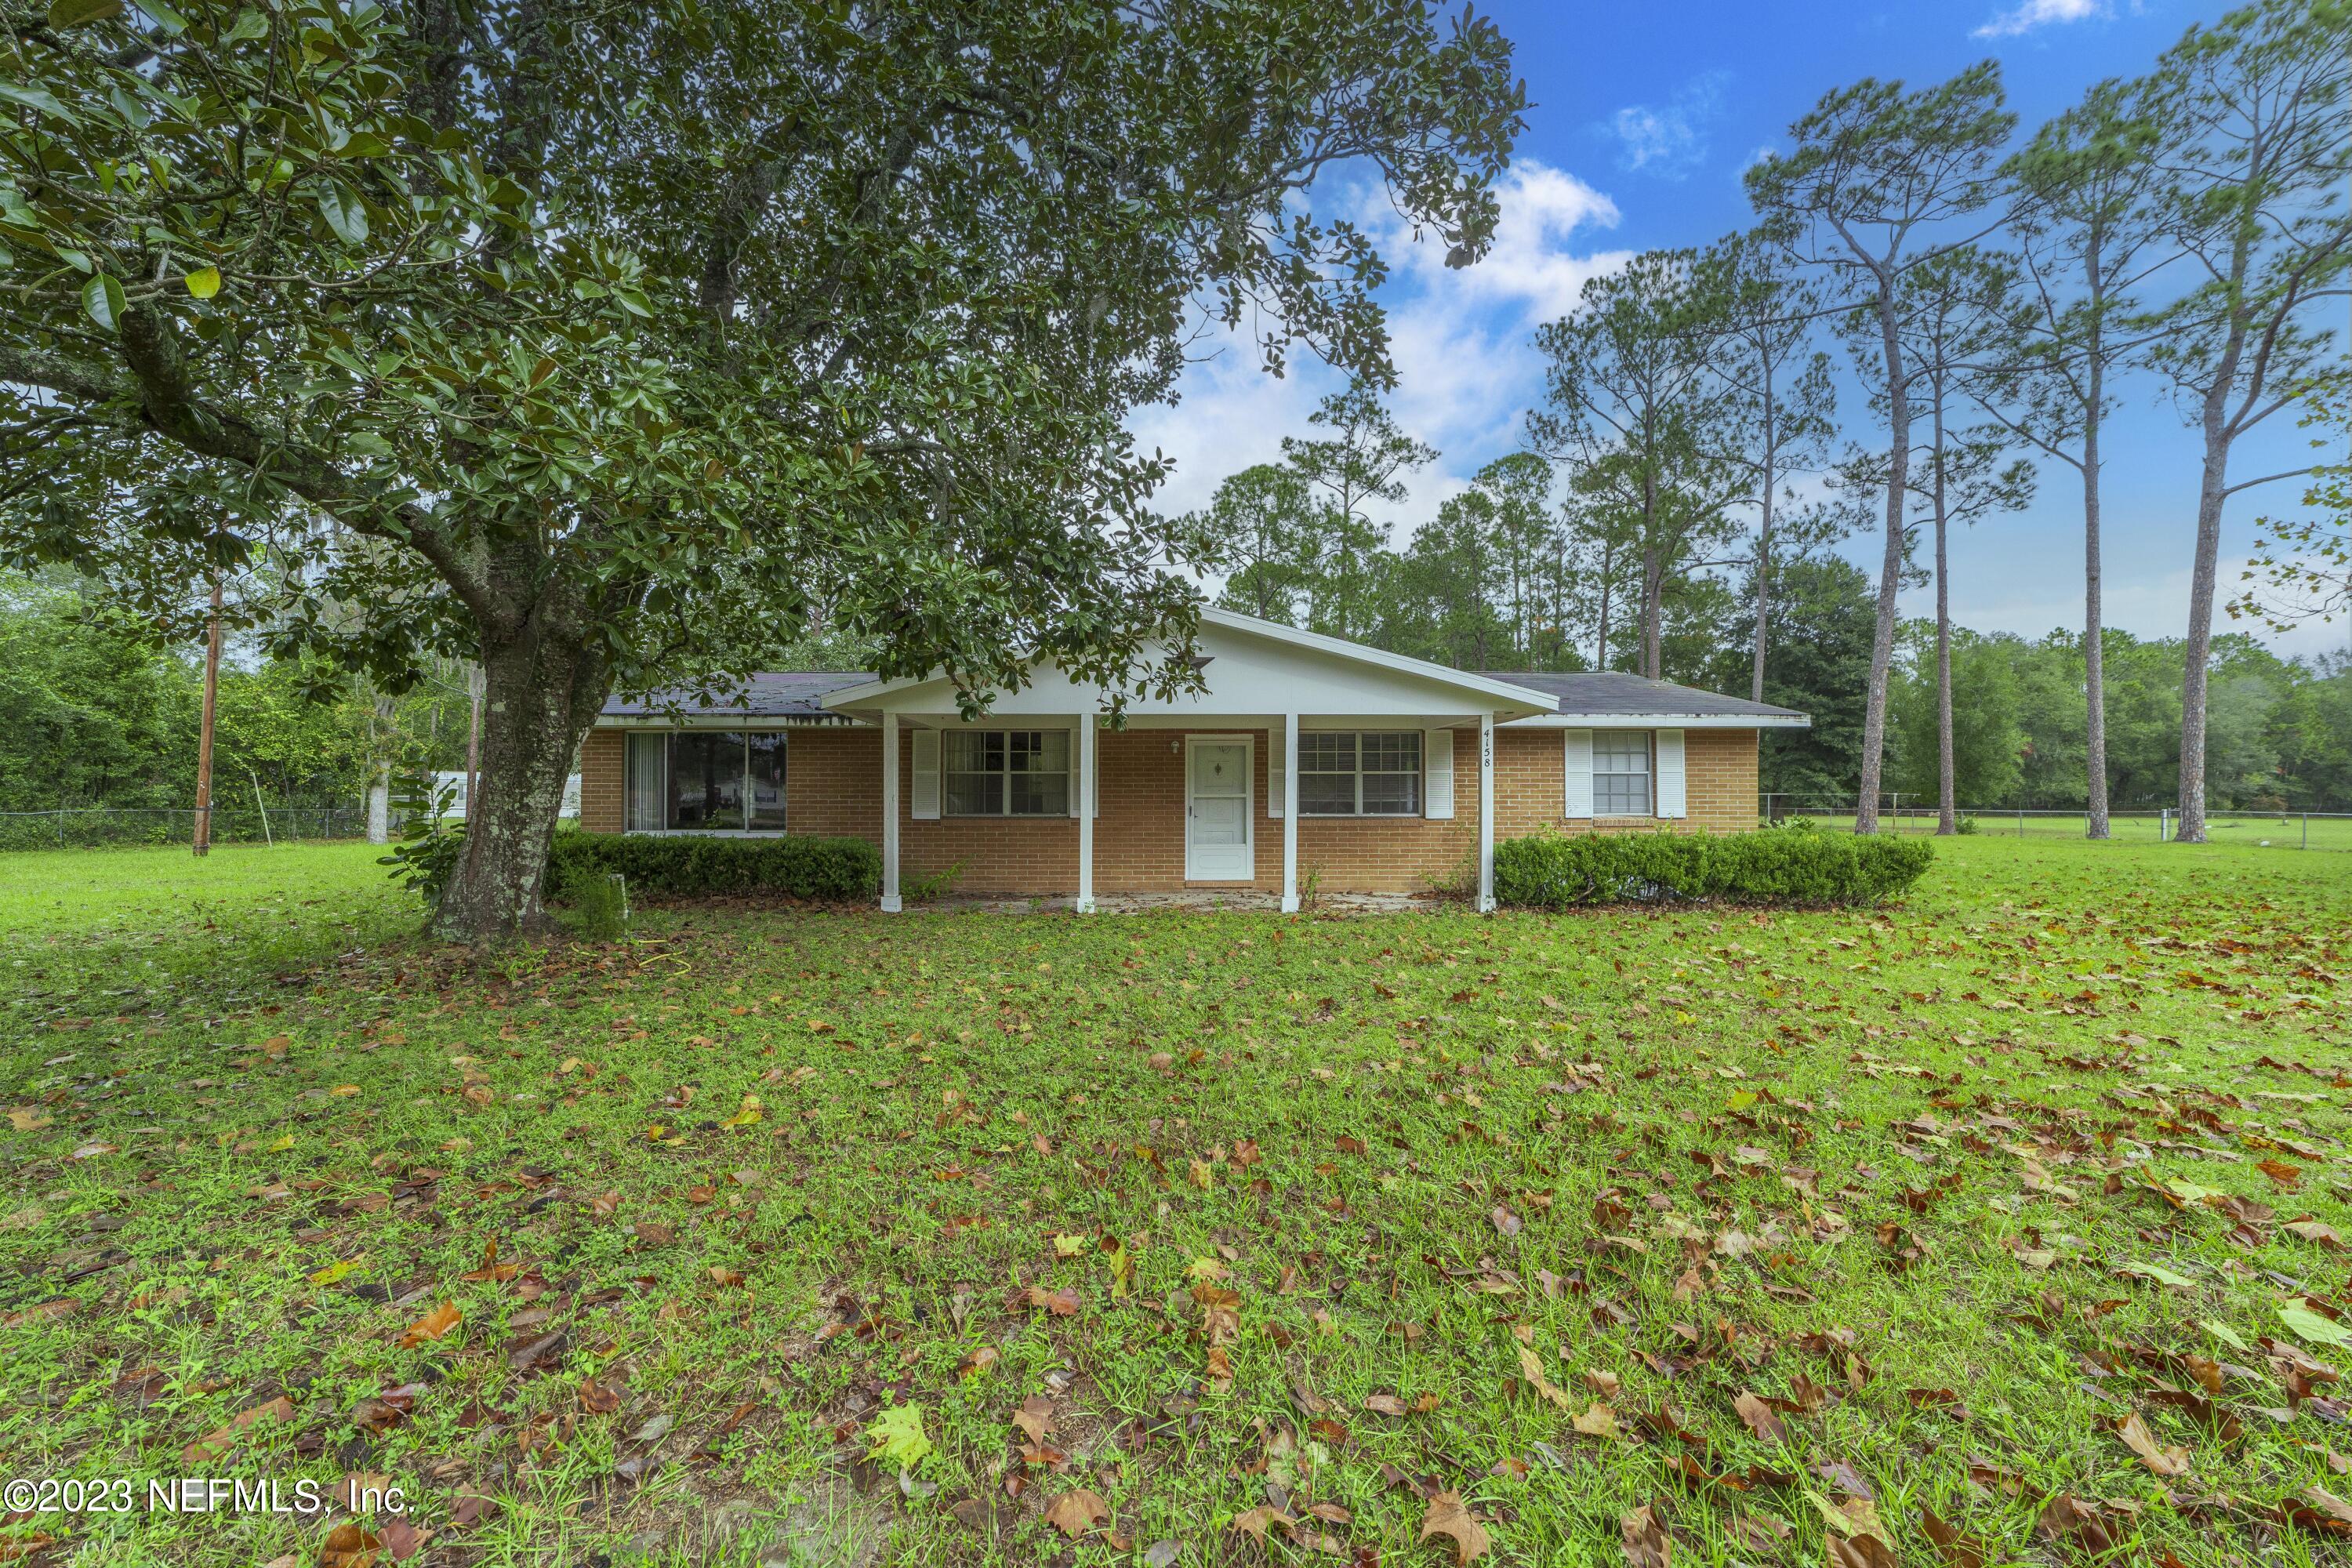 Middleburg, FL home for sale located at 4158 Old Jennings Road, Middleburg, FL 32068